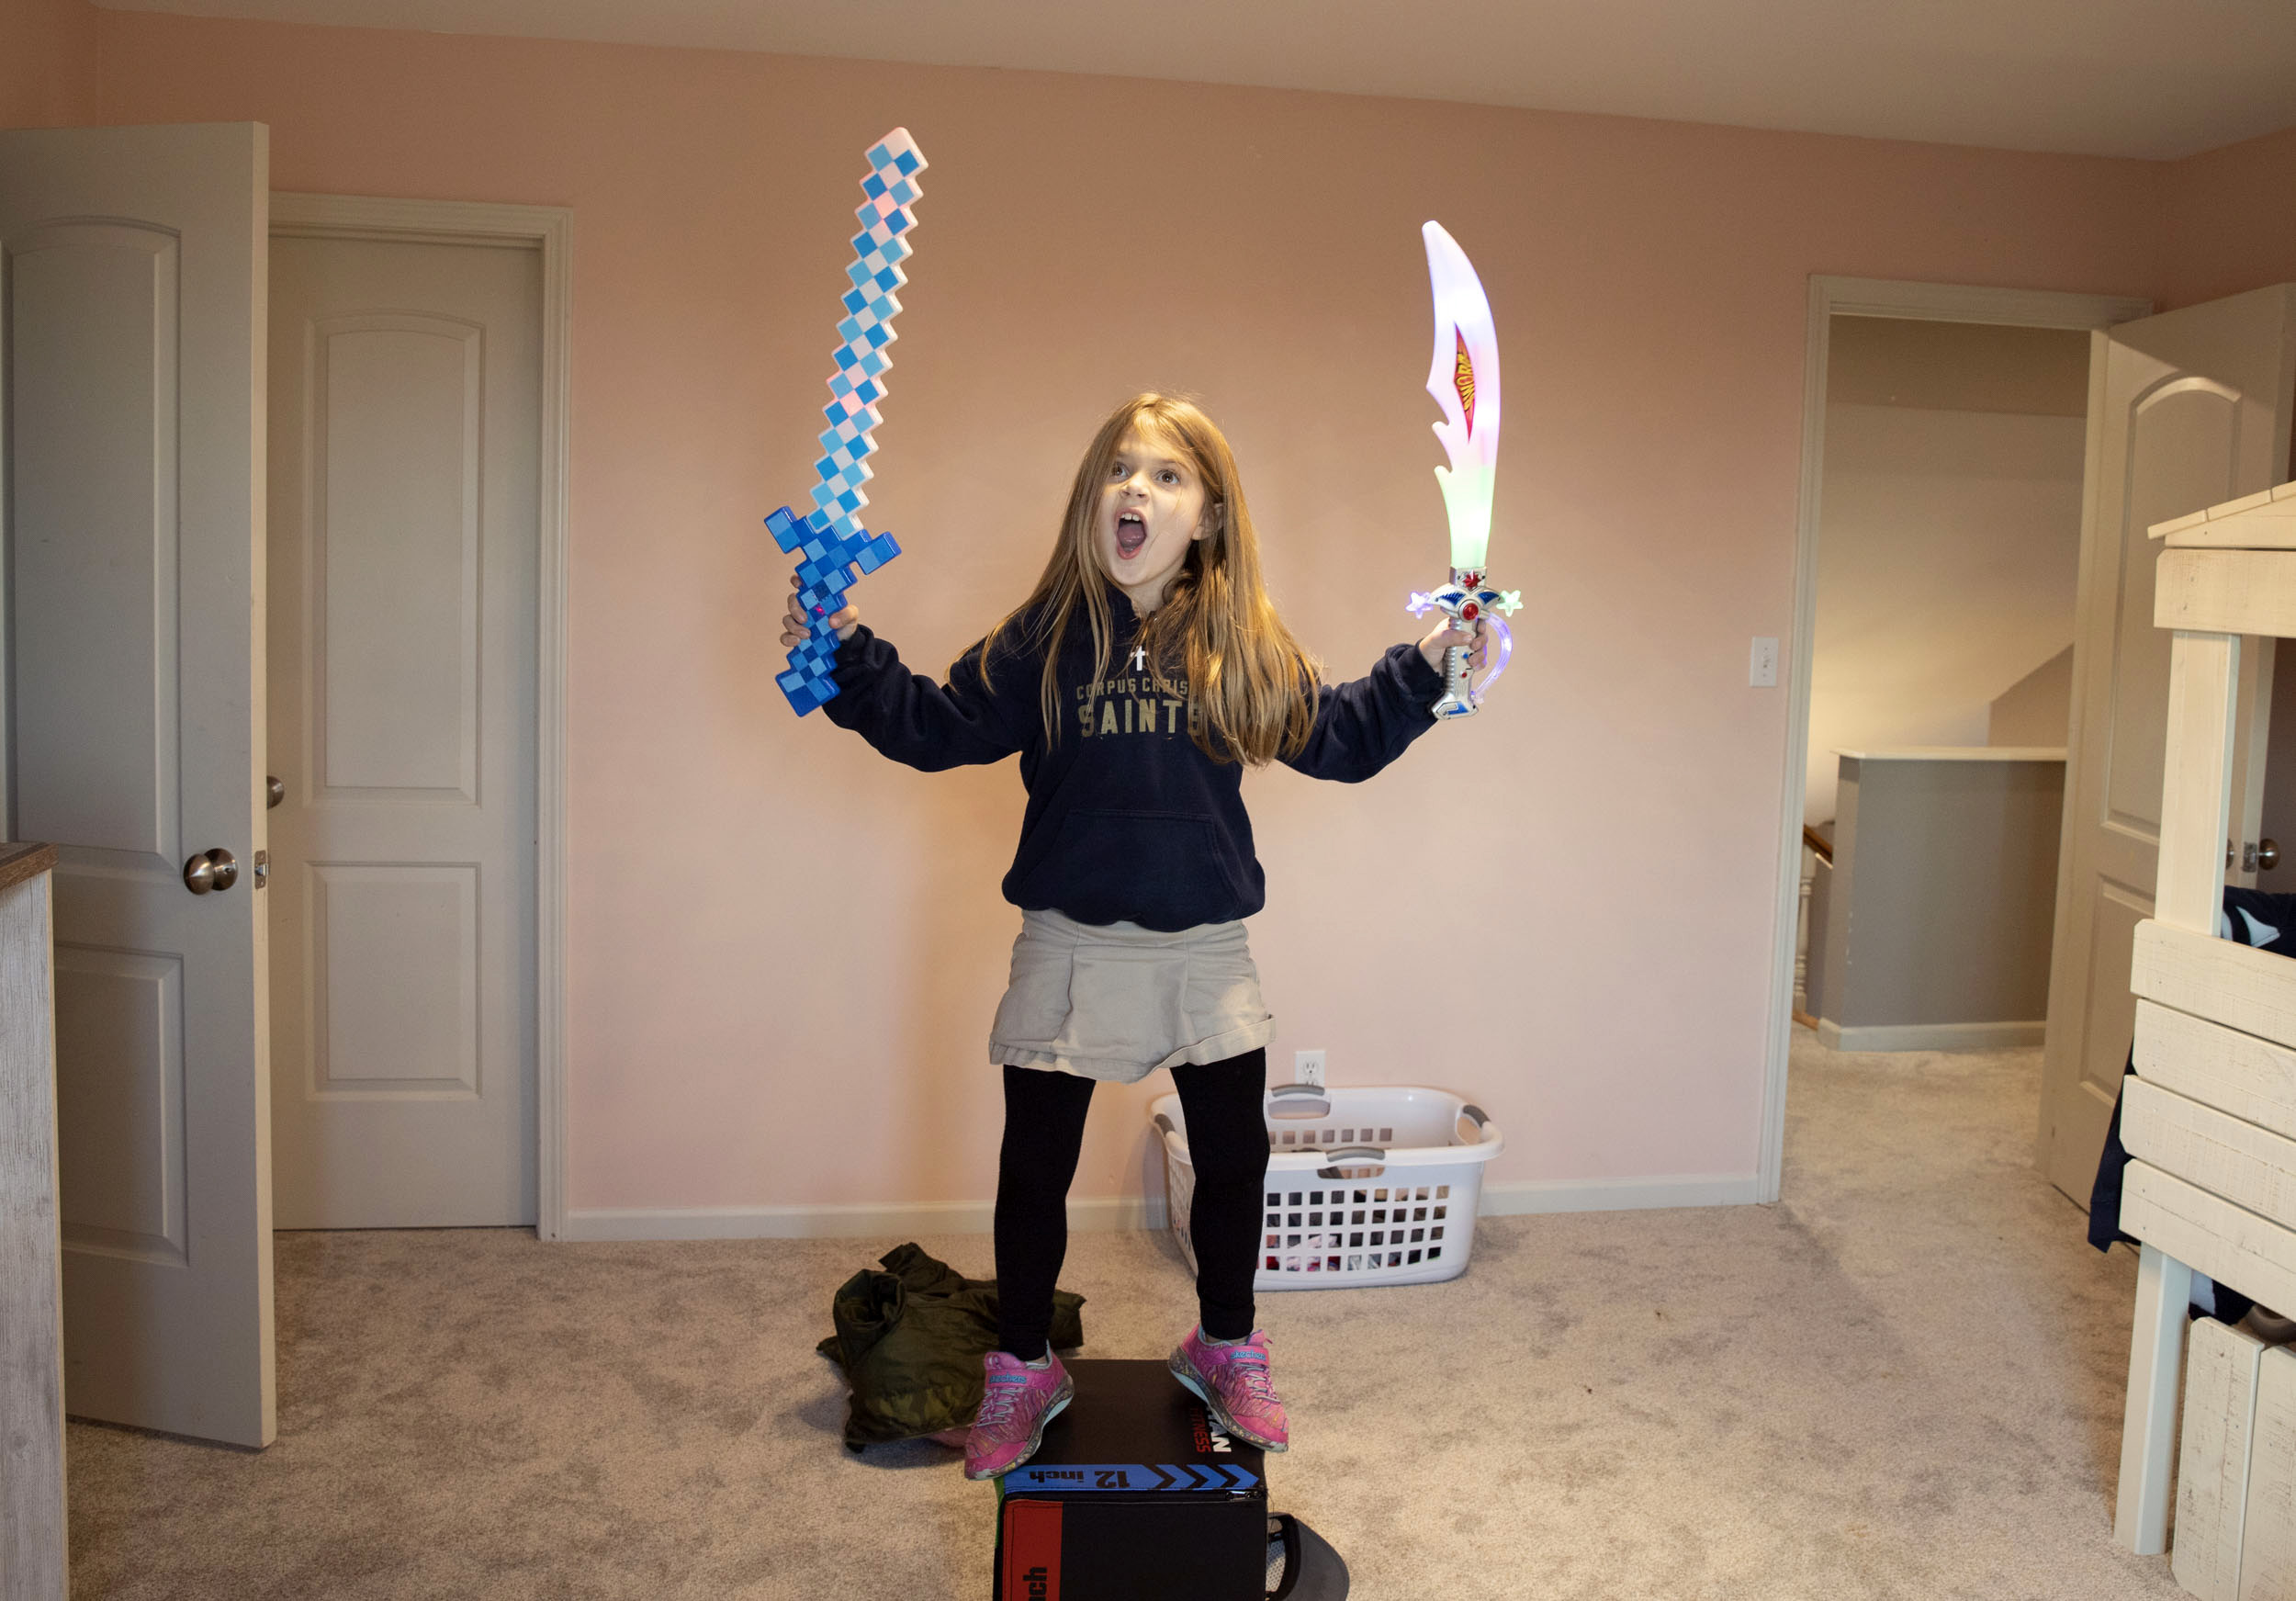 Young girl poses with toy swords